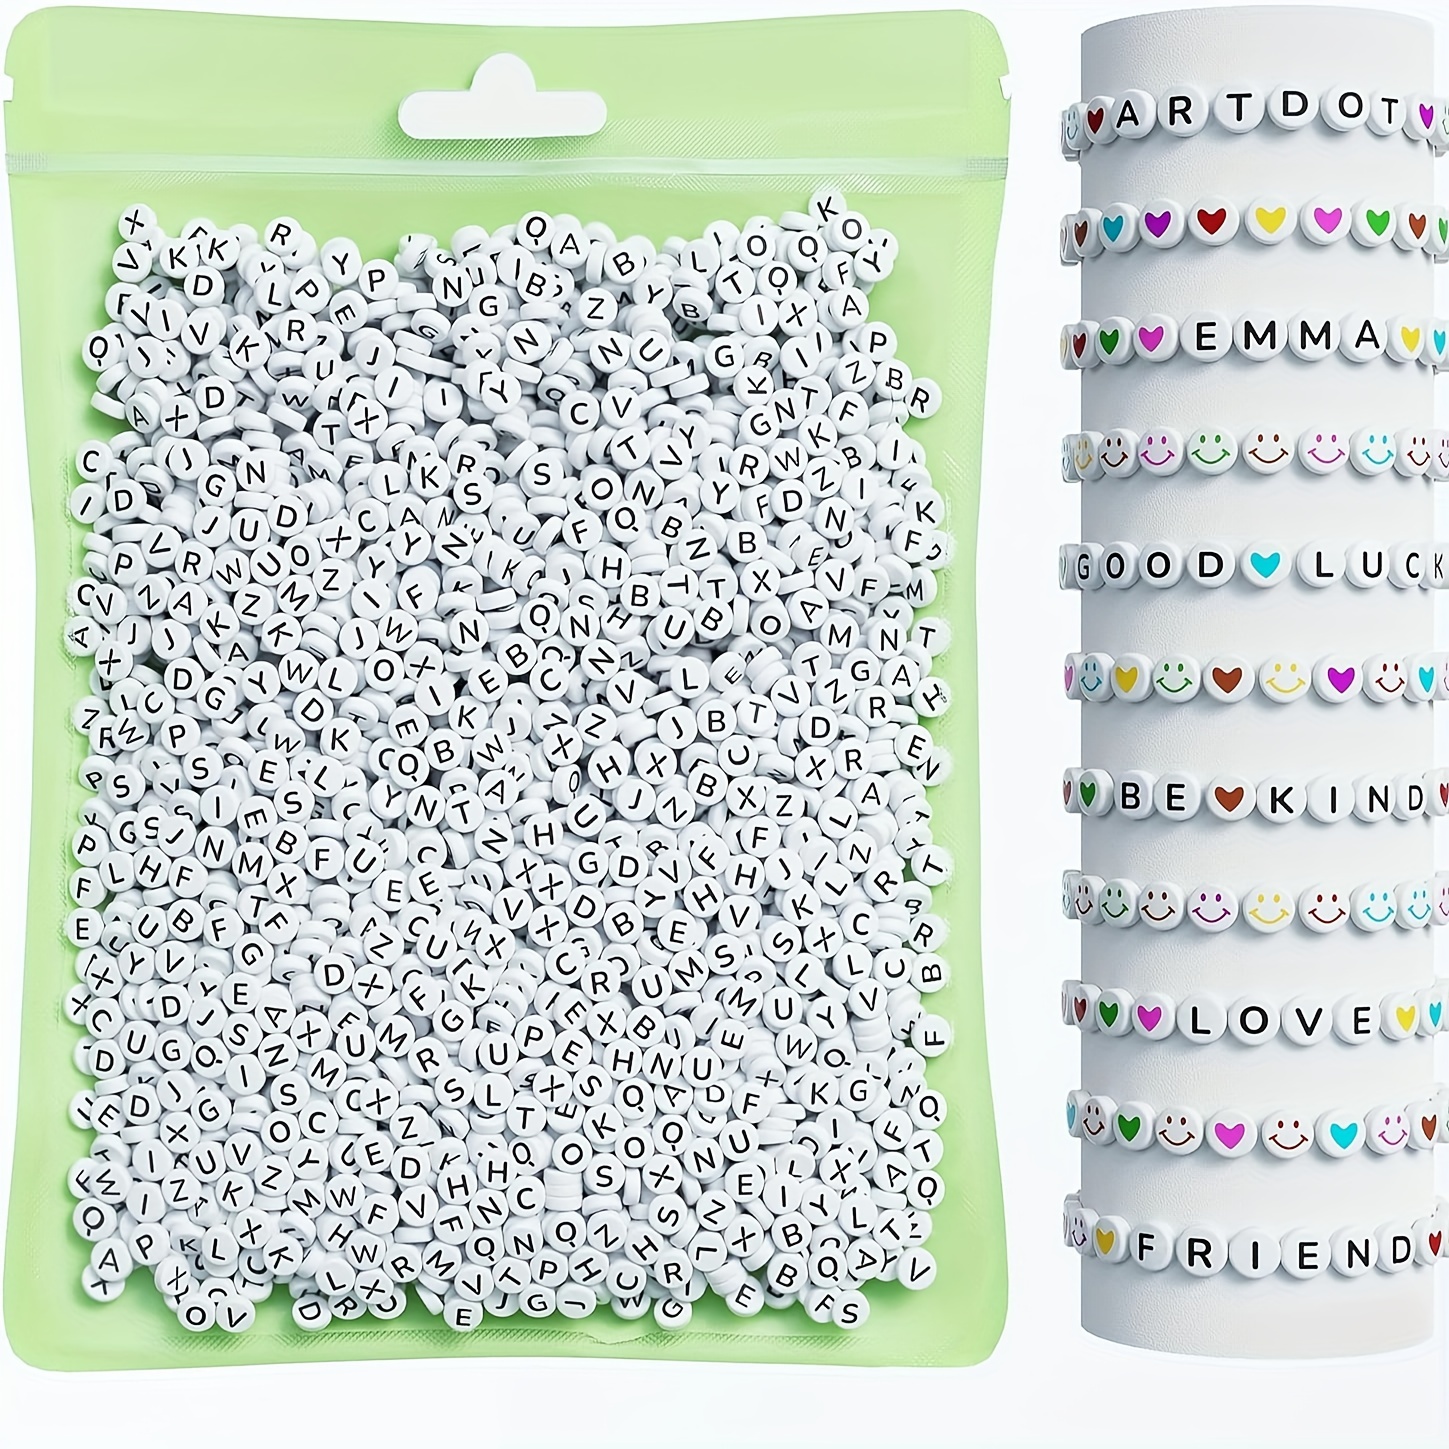 

800-piece Alphabet Bead Kit For Diy Jewelry - 28 Styles Including Friendship Bracelets, Colorful Icon Faces & Heart Charms - Perfect Gift For Girls